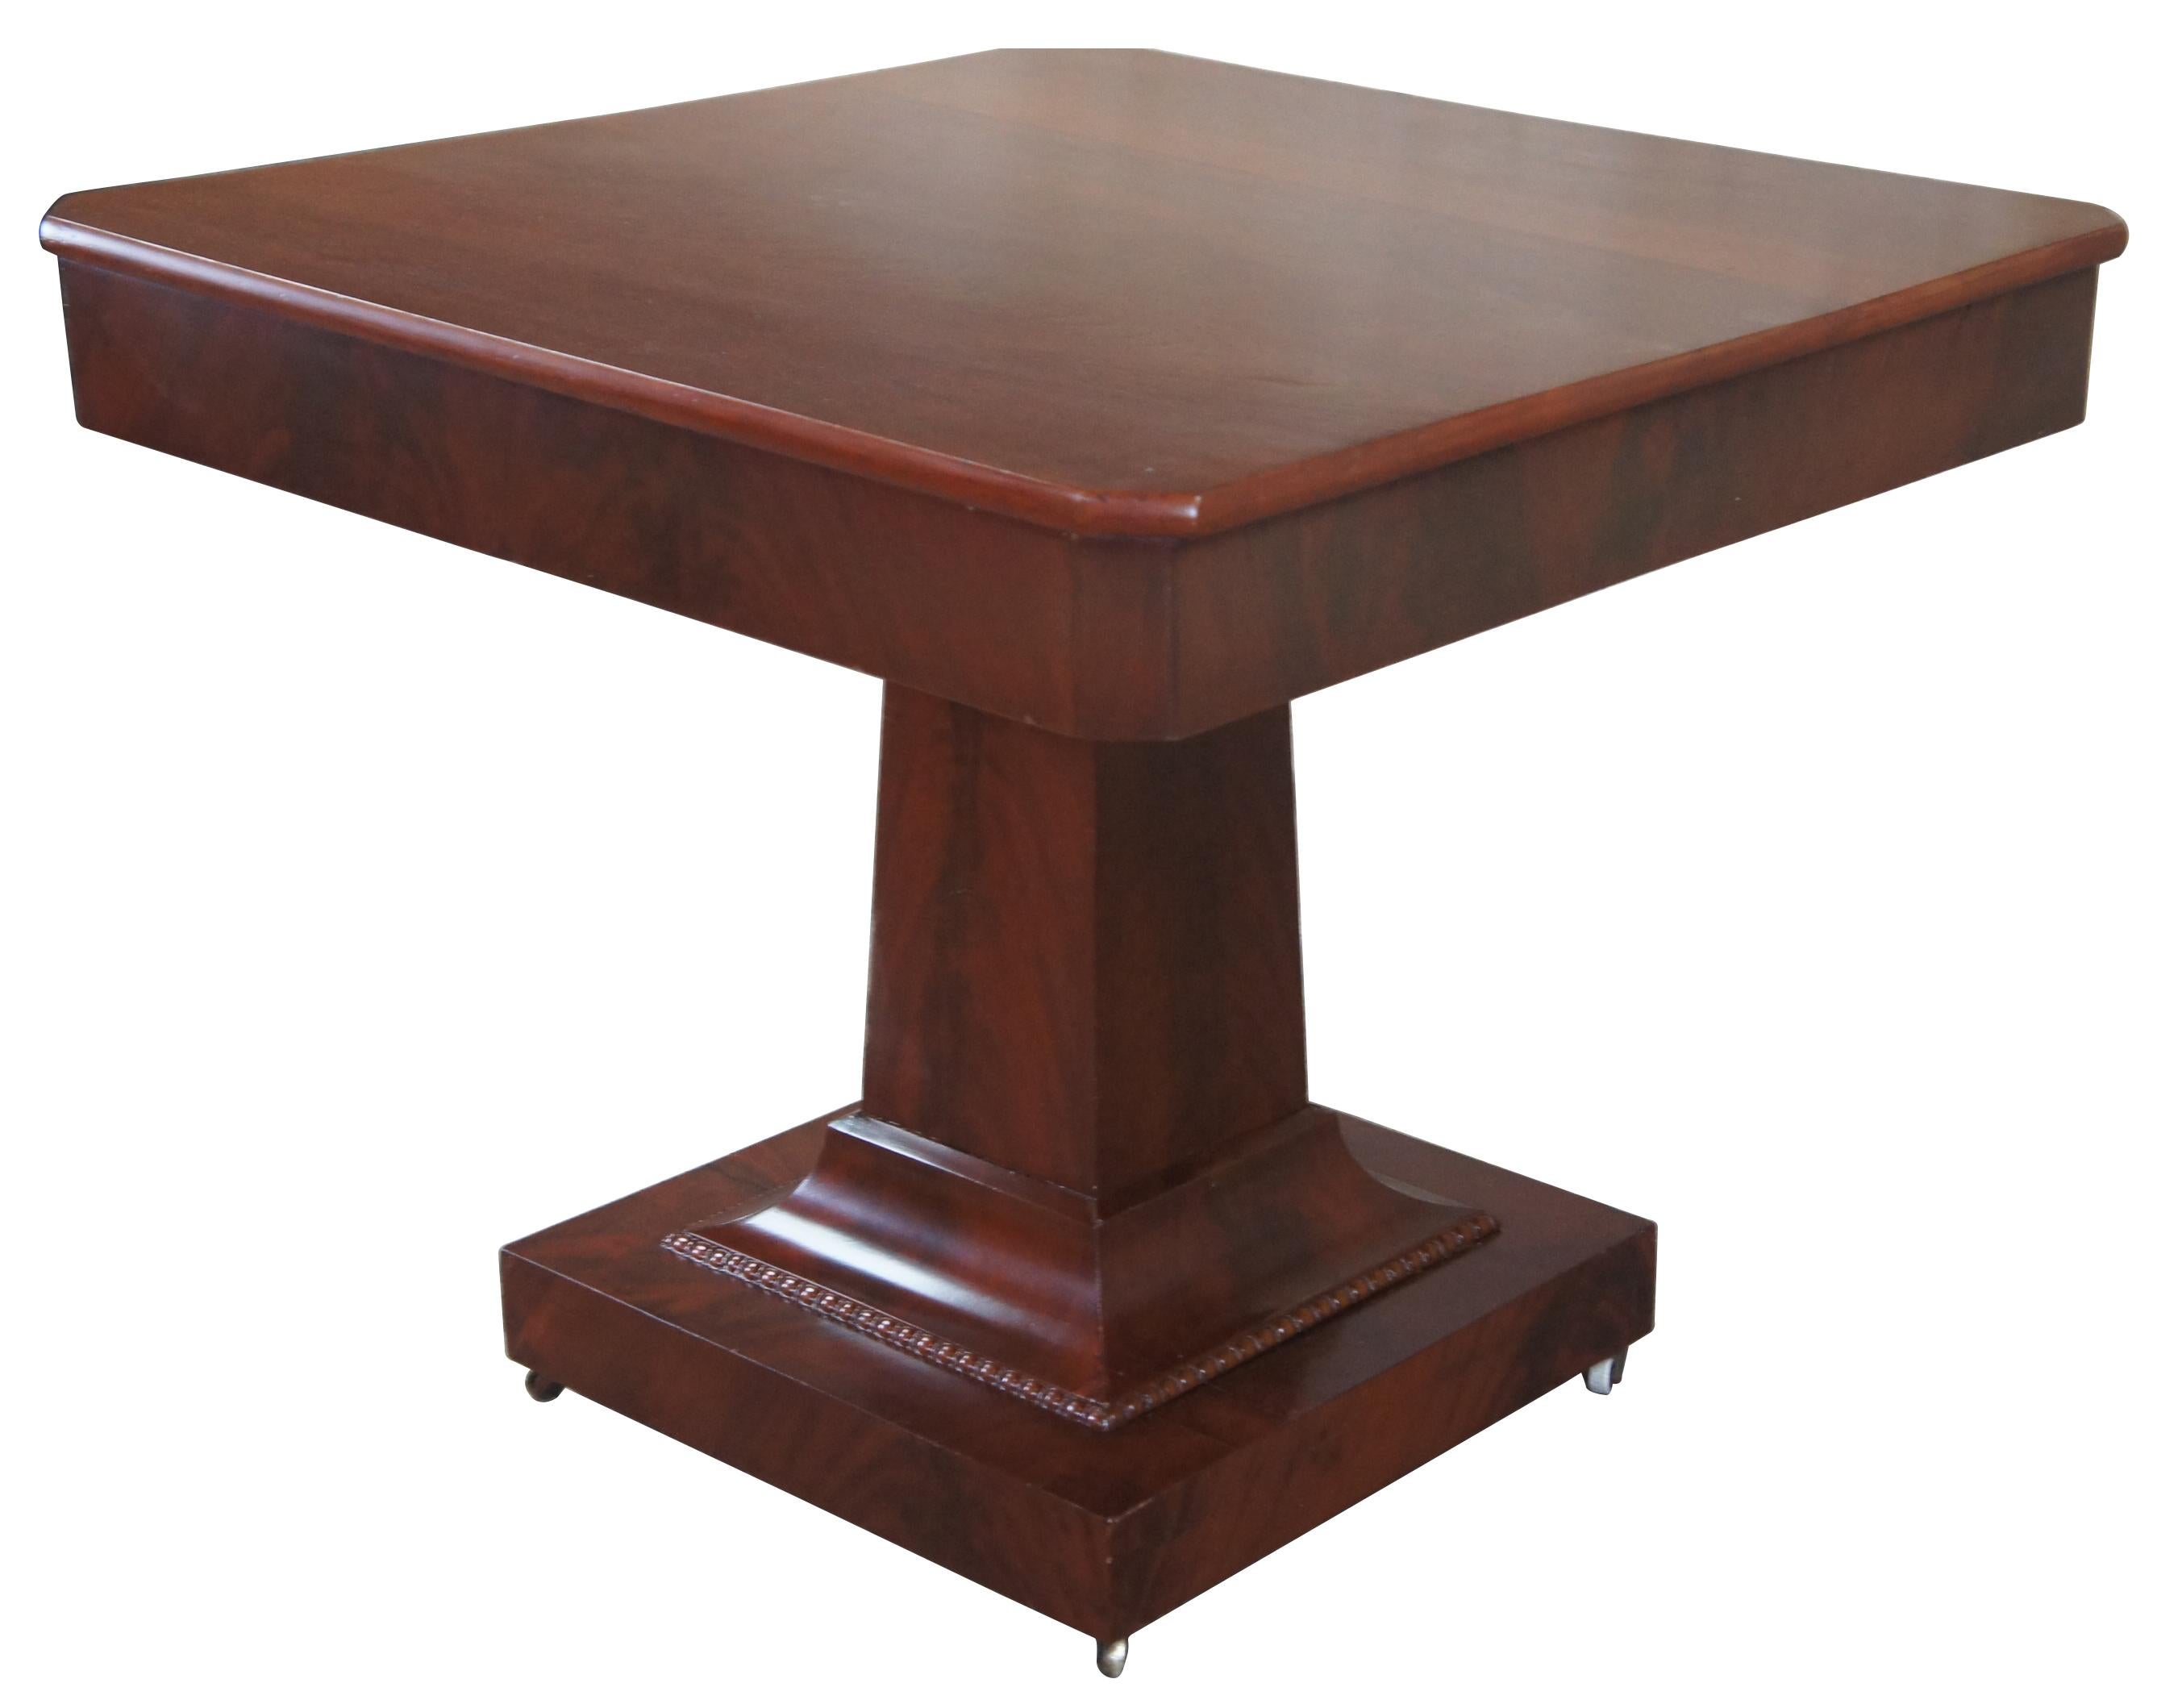 Antique American Empire pedestal center table. Made of mahogany with a crotch veneer featuring a square form and pedestal base with castors. Measures: 34